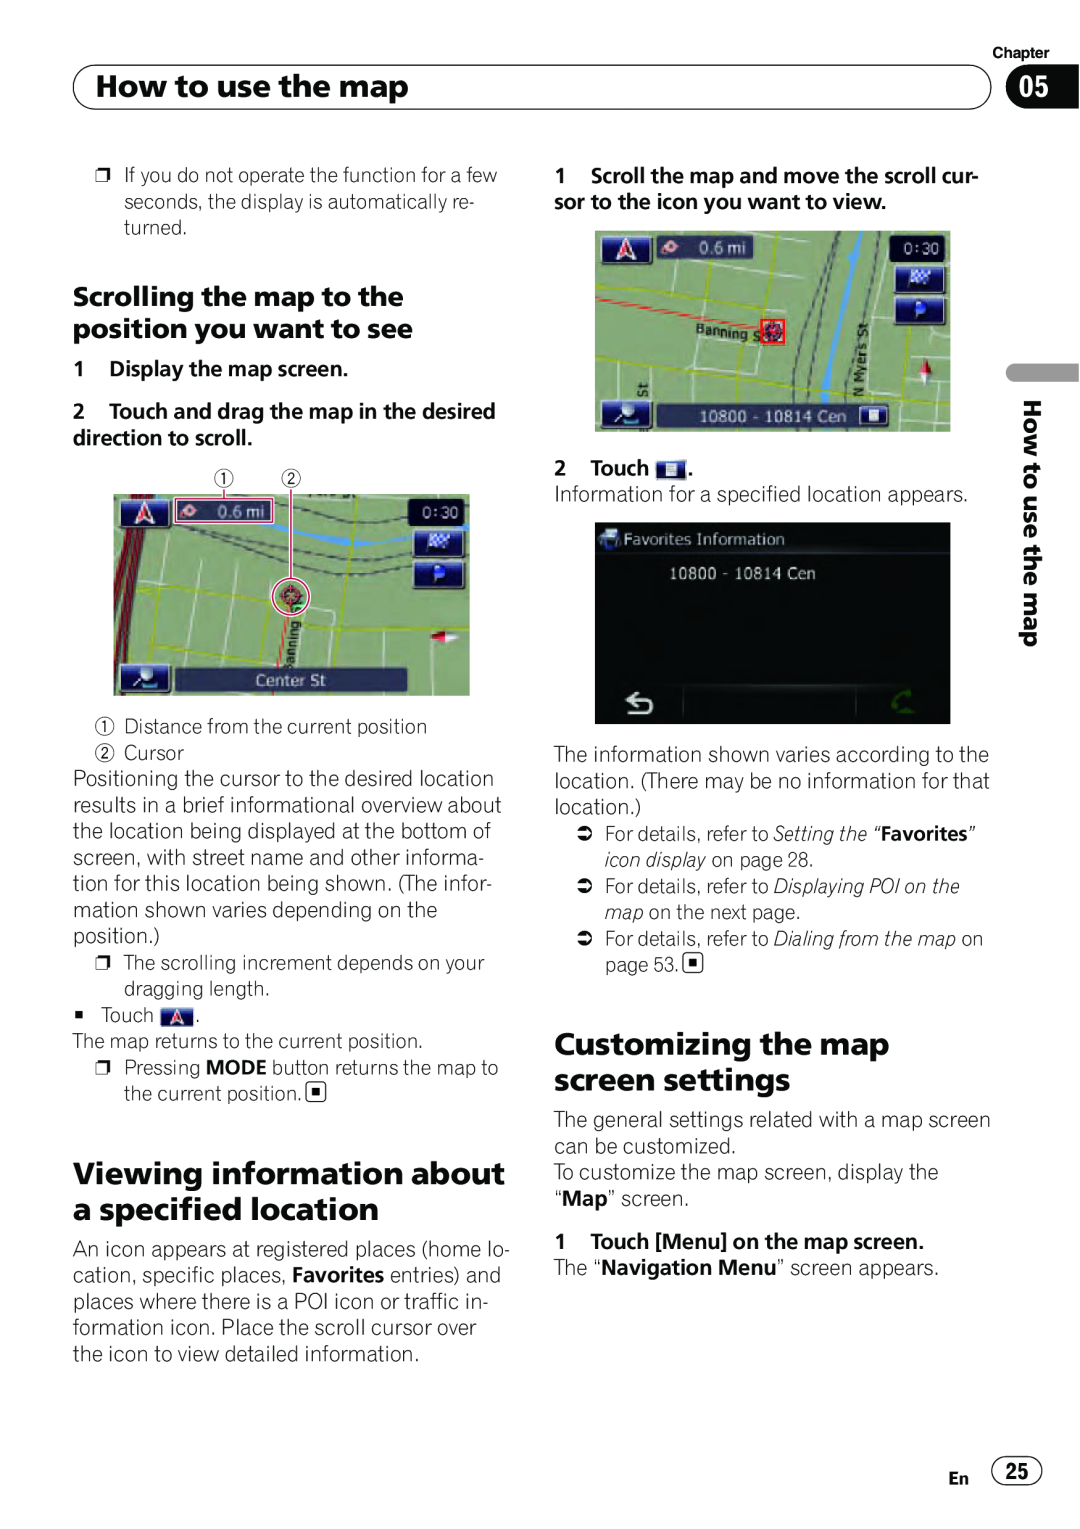 Pioneer AVIC-U310BT Viewing information about a specified location, Customizing the map screen settings, use the map 